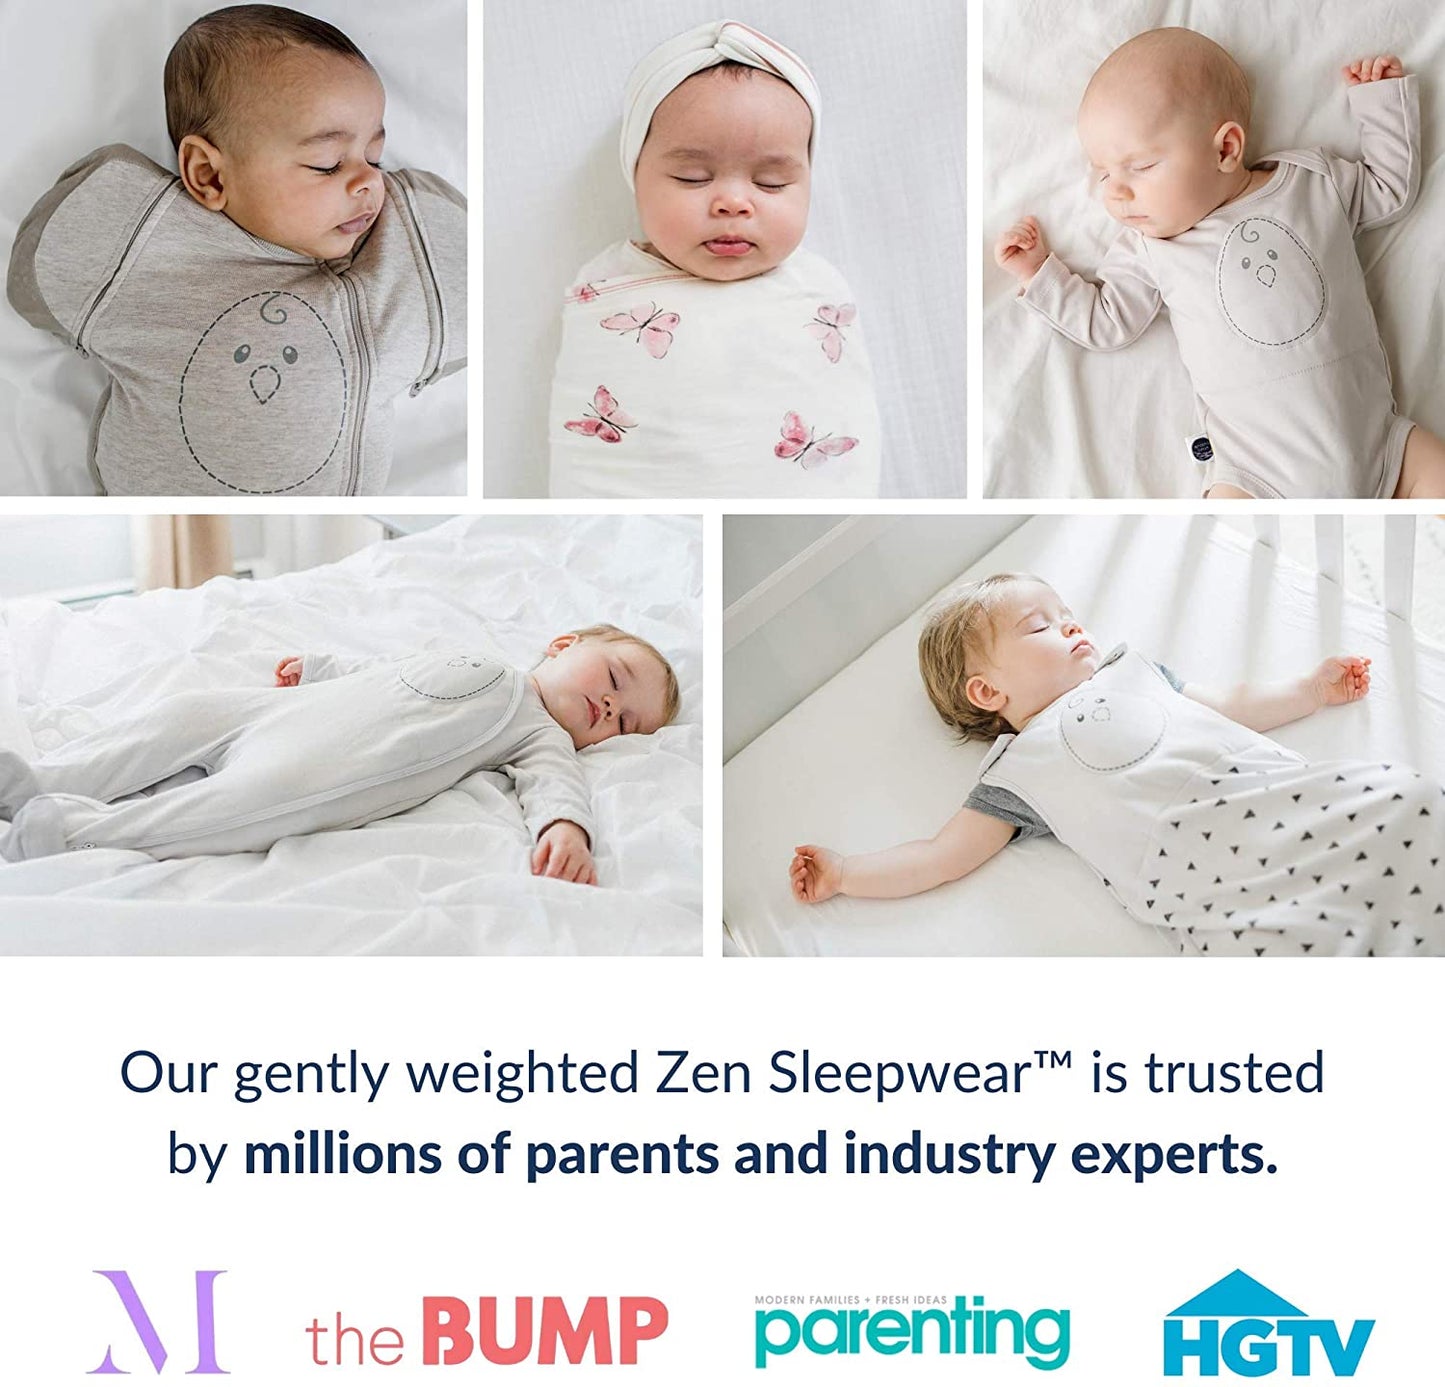 Nested Bean Zen Sack - Gently Weighted Sleep Sacks | Baby: 0-6 Months | Cotton 100% | Help Newborn/Infant Swaddle Transition | 2-Way Zipper | Machine Washable - (For 6 piece(s))